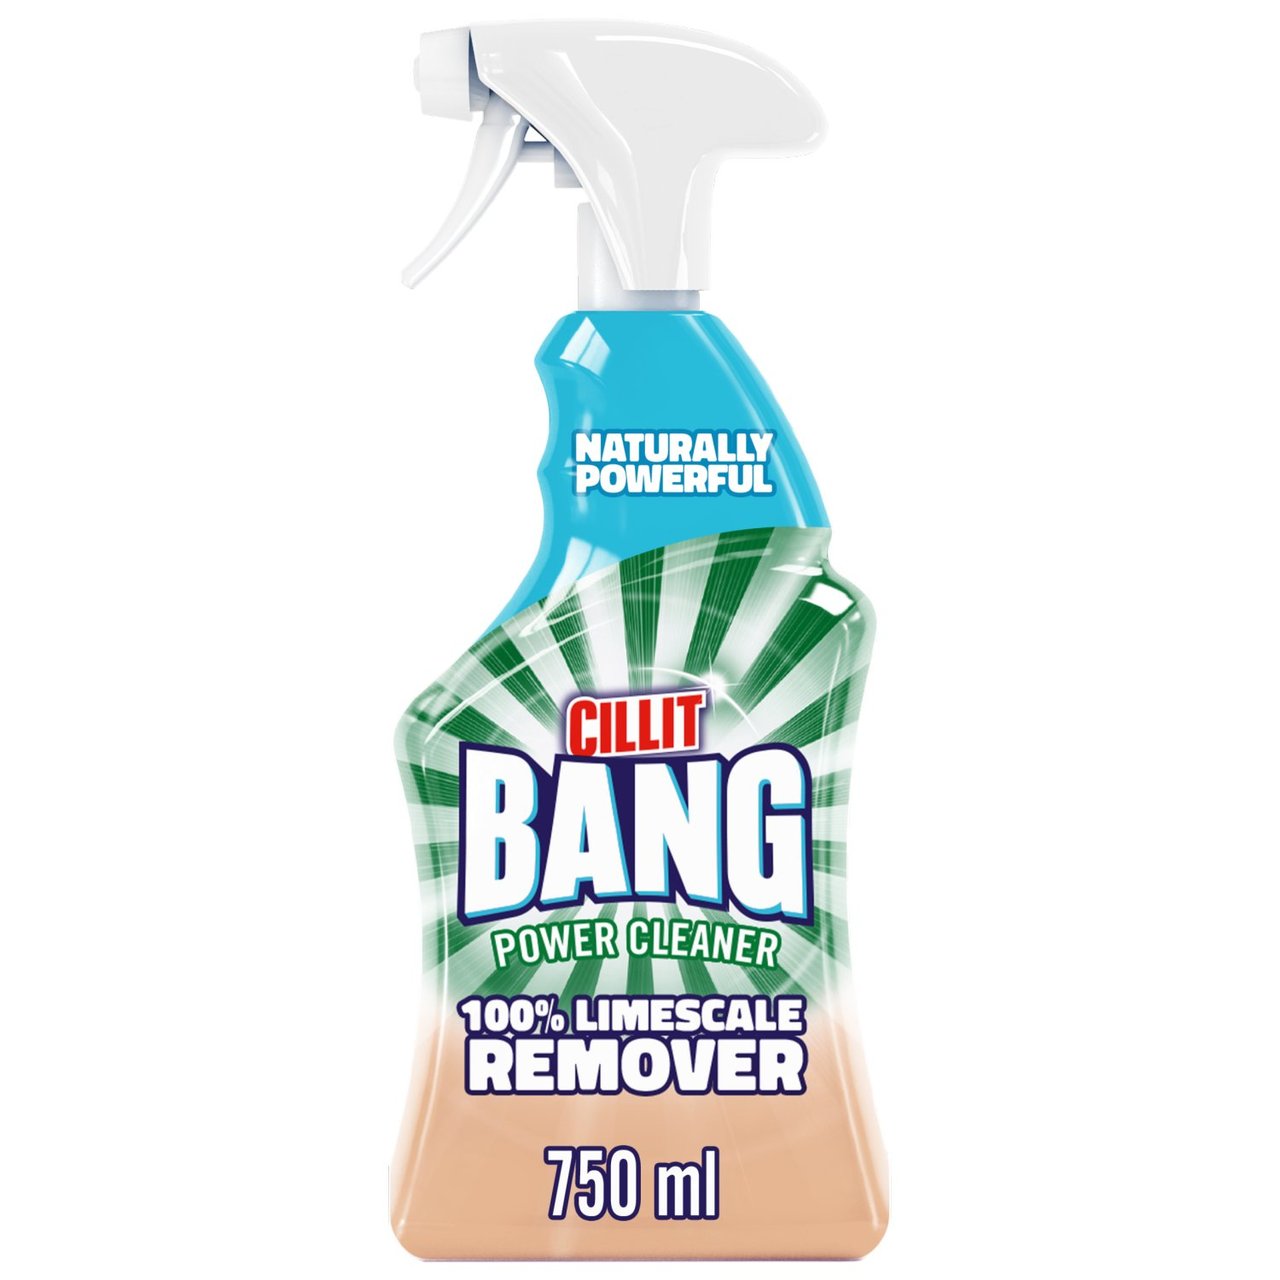 Bottle of Cillit Bang power cleaner degreaser, cleaning product